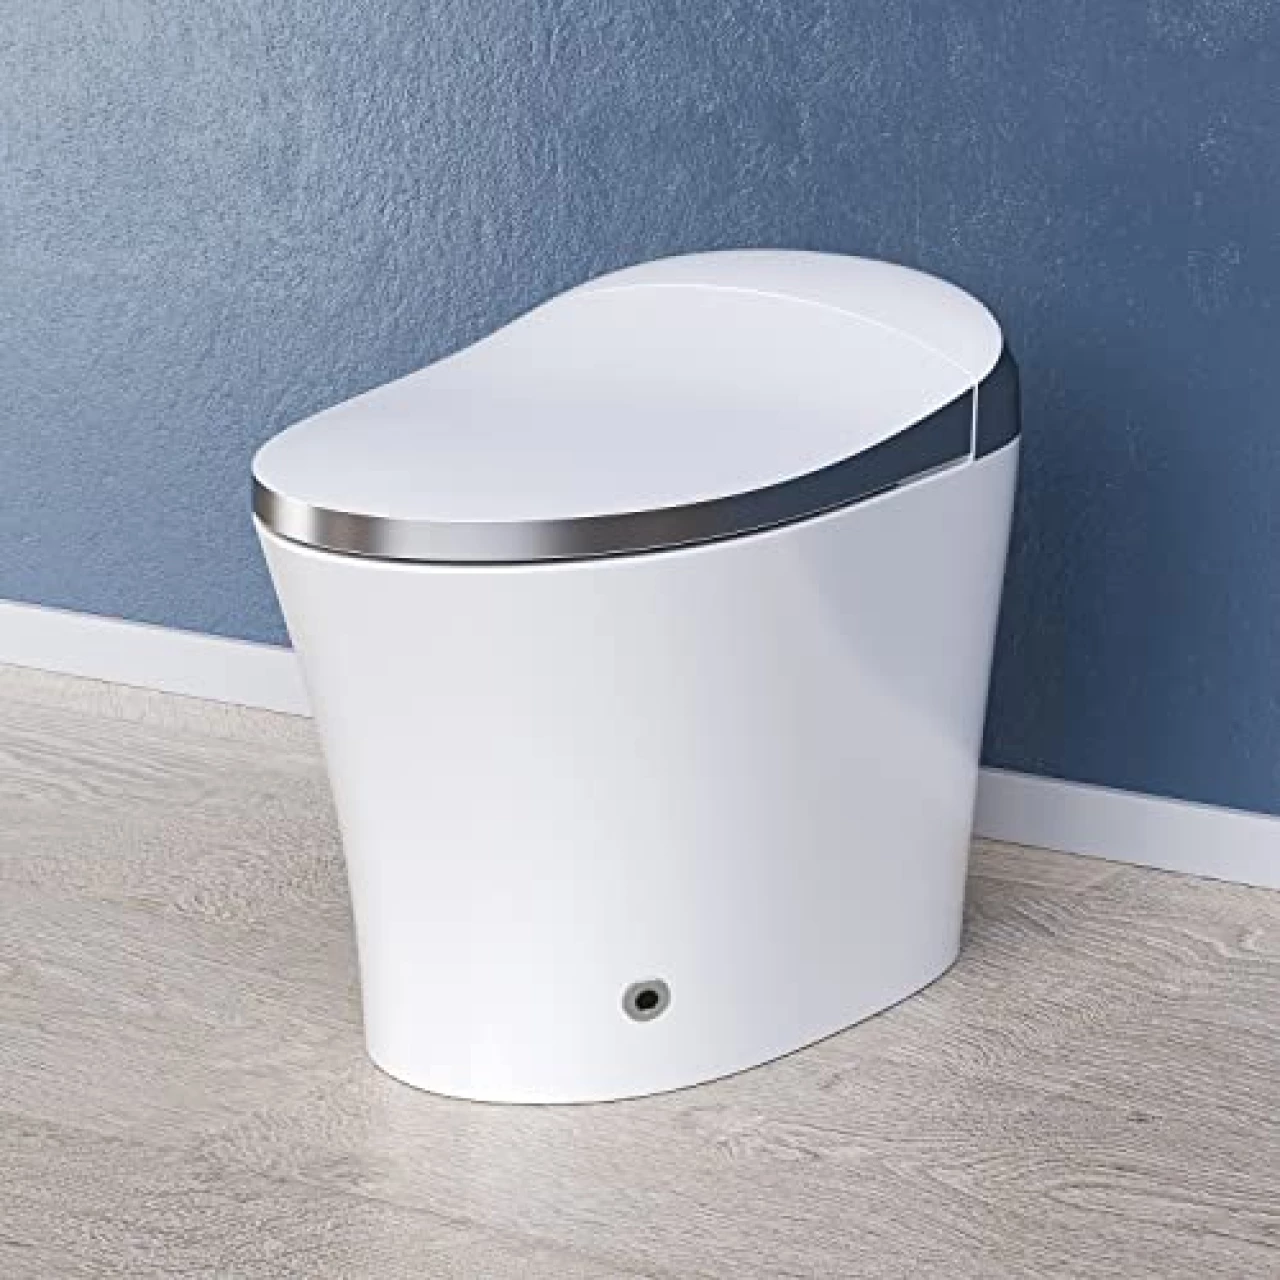 HOROW Luxury Smart Toilet, Heated Bidet with Dryer and Warm Water, Bidet Toilet with Heated Seat, Auto Close Toilet Seat, Modern Tankless Toilet with Remote Control, Night Light, White